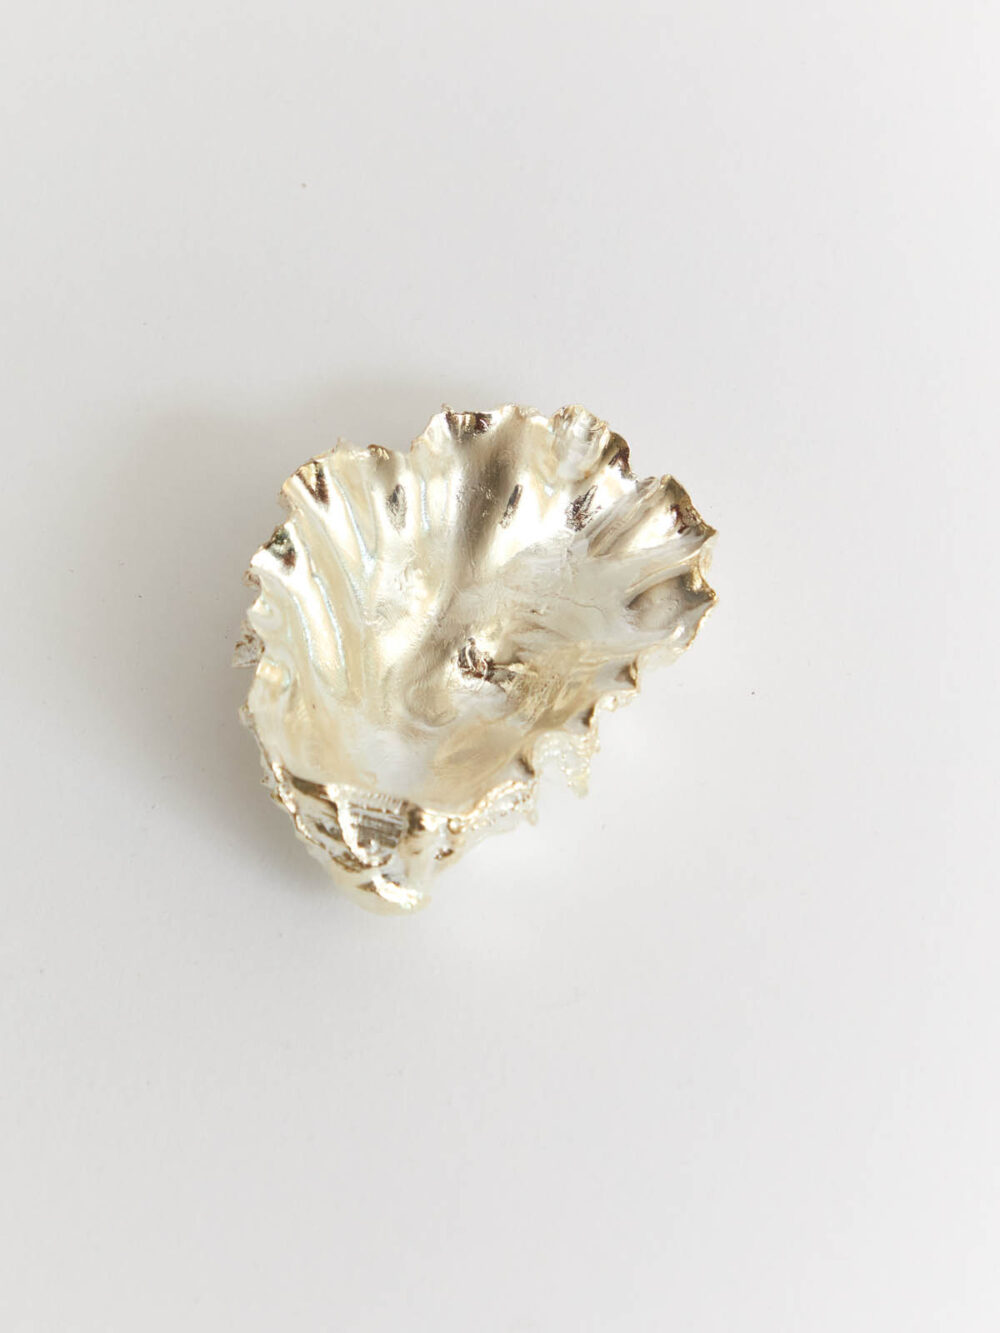 Silver & White Bronze Oyster Shell small by Leiger on white background